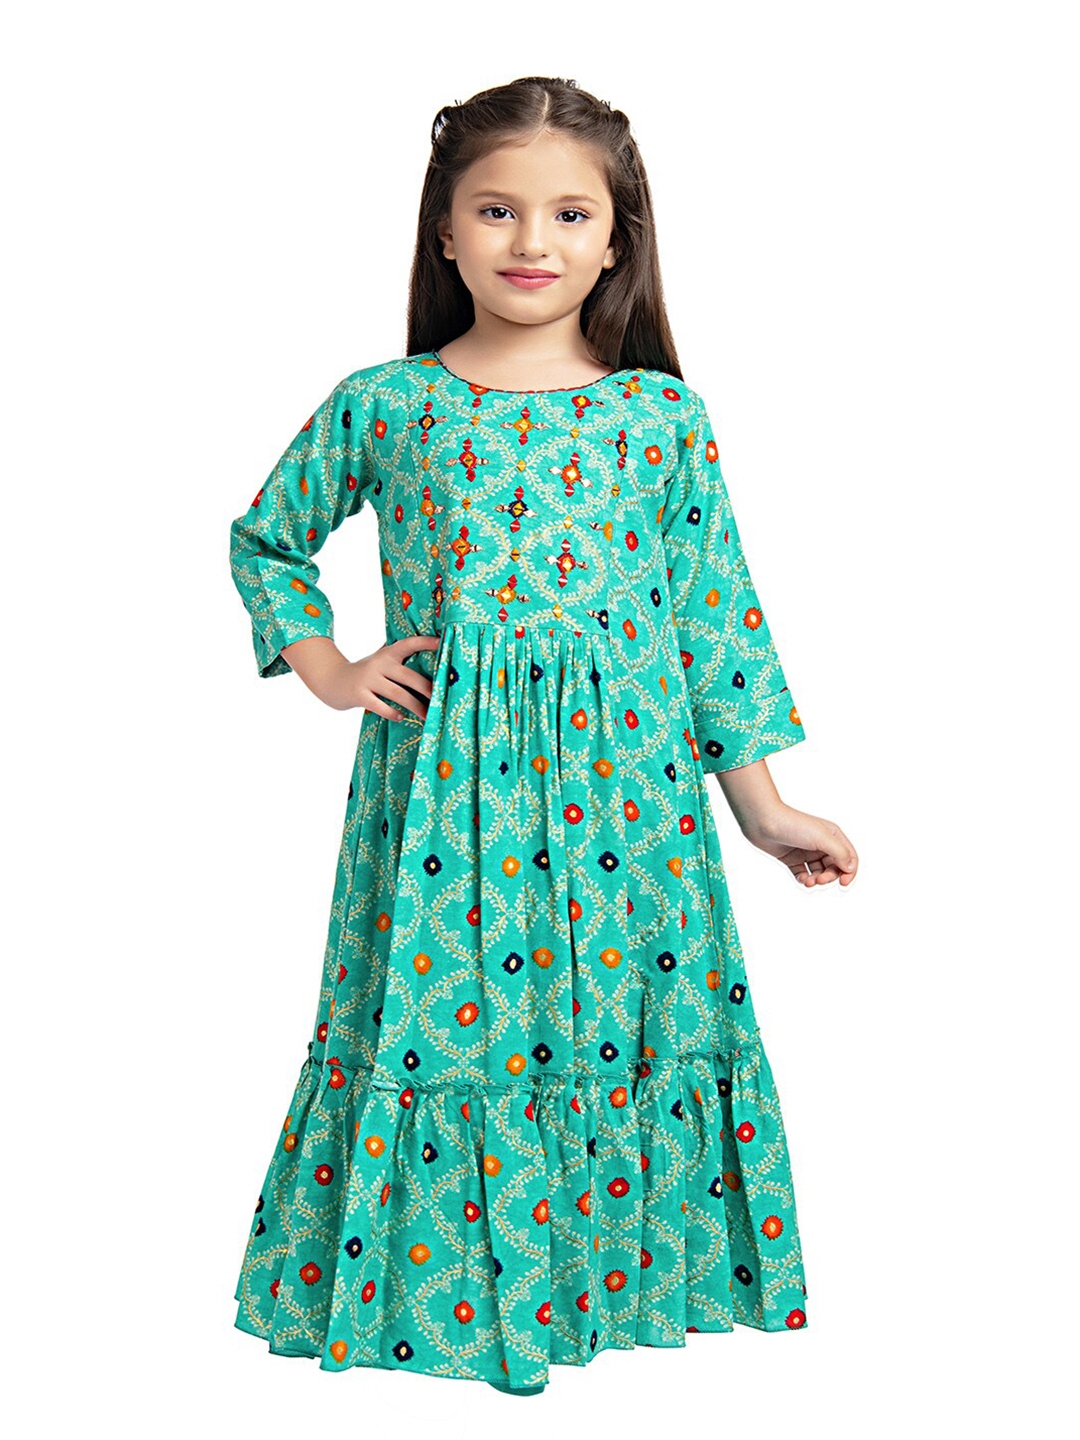 Buy BETTY Green Floral Maxi Dress - Dresses for Girls 19392890 | Myntra